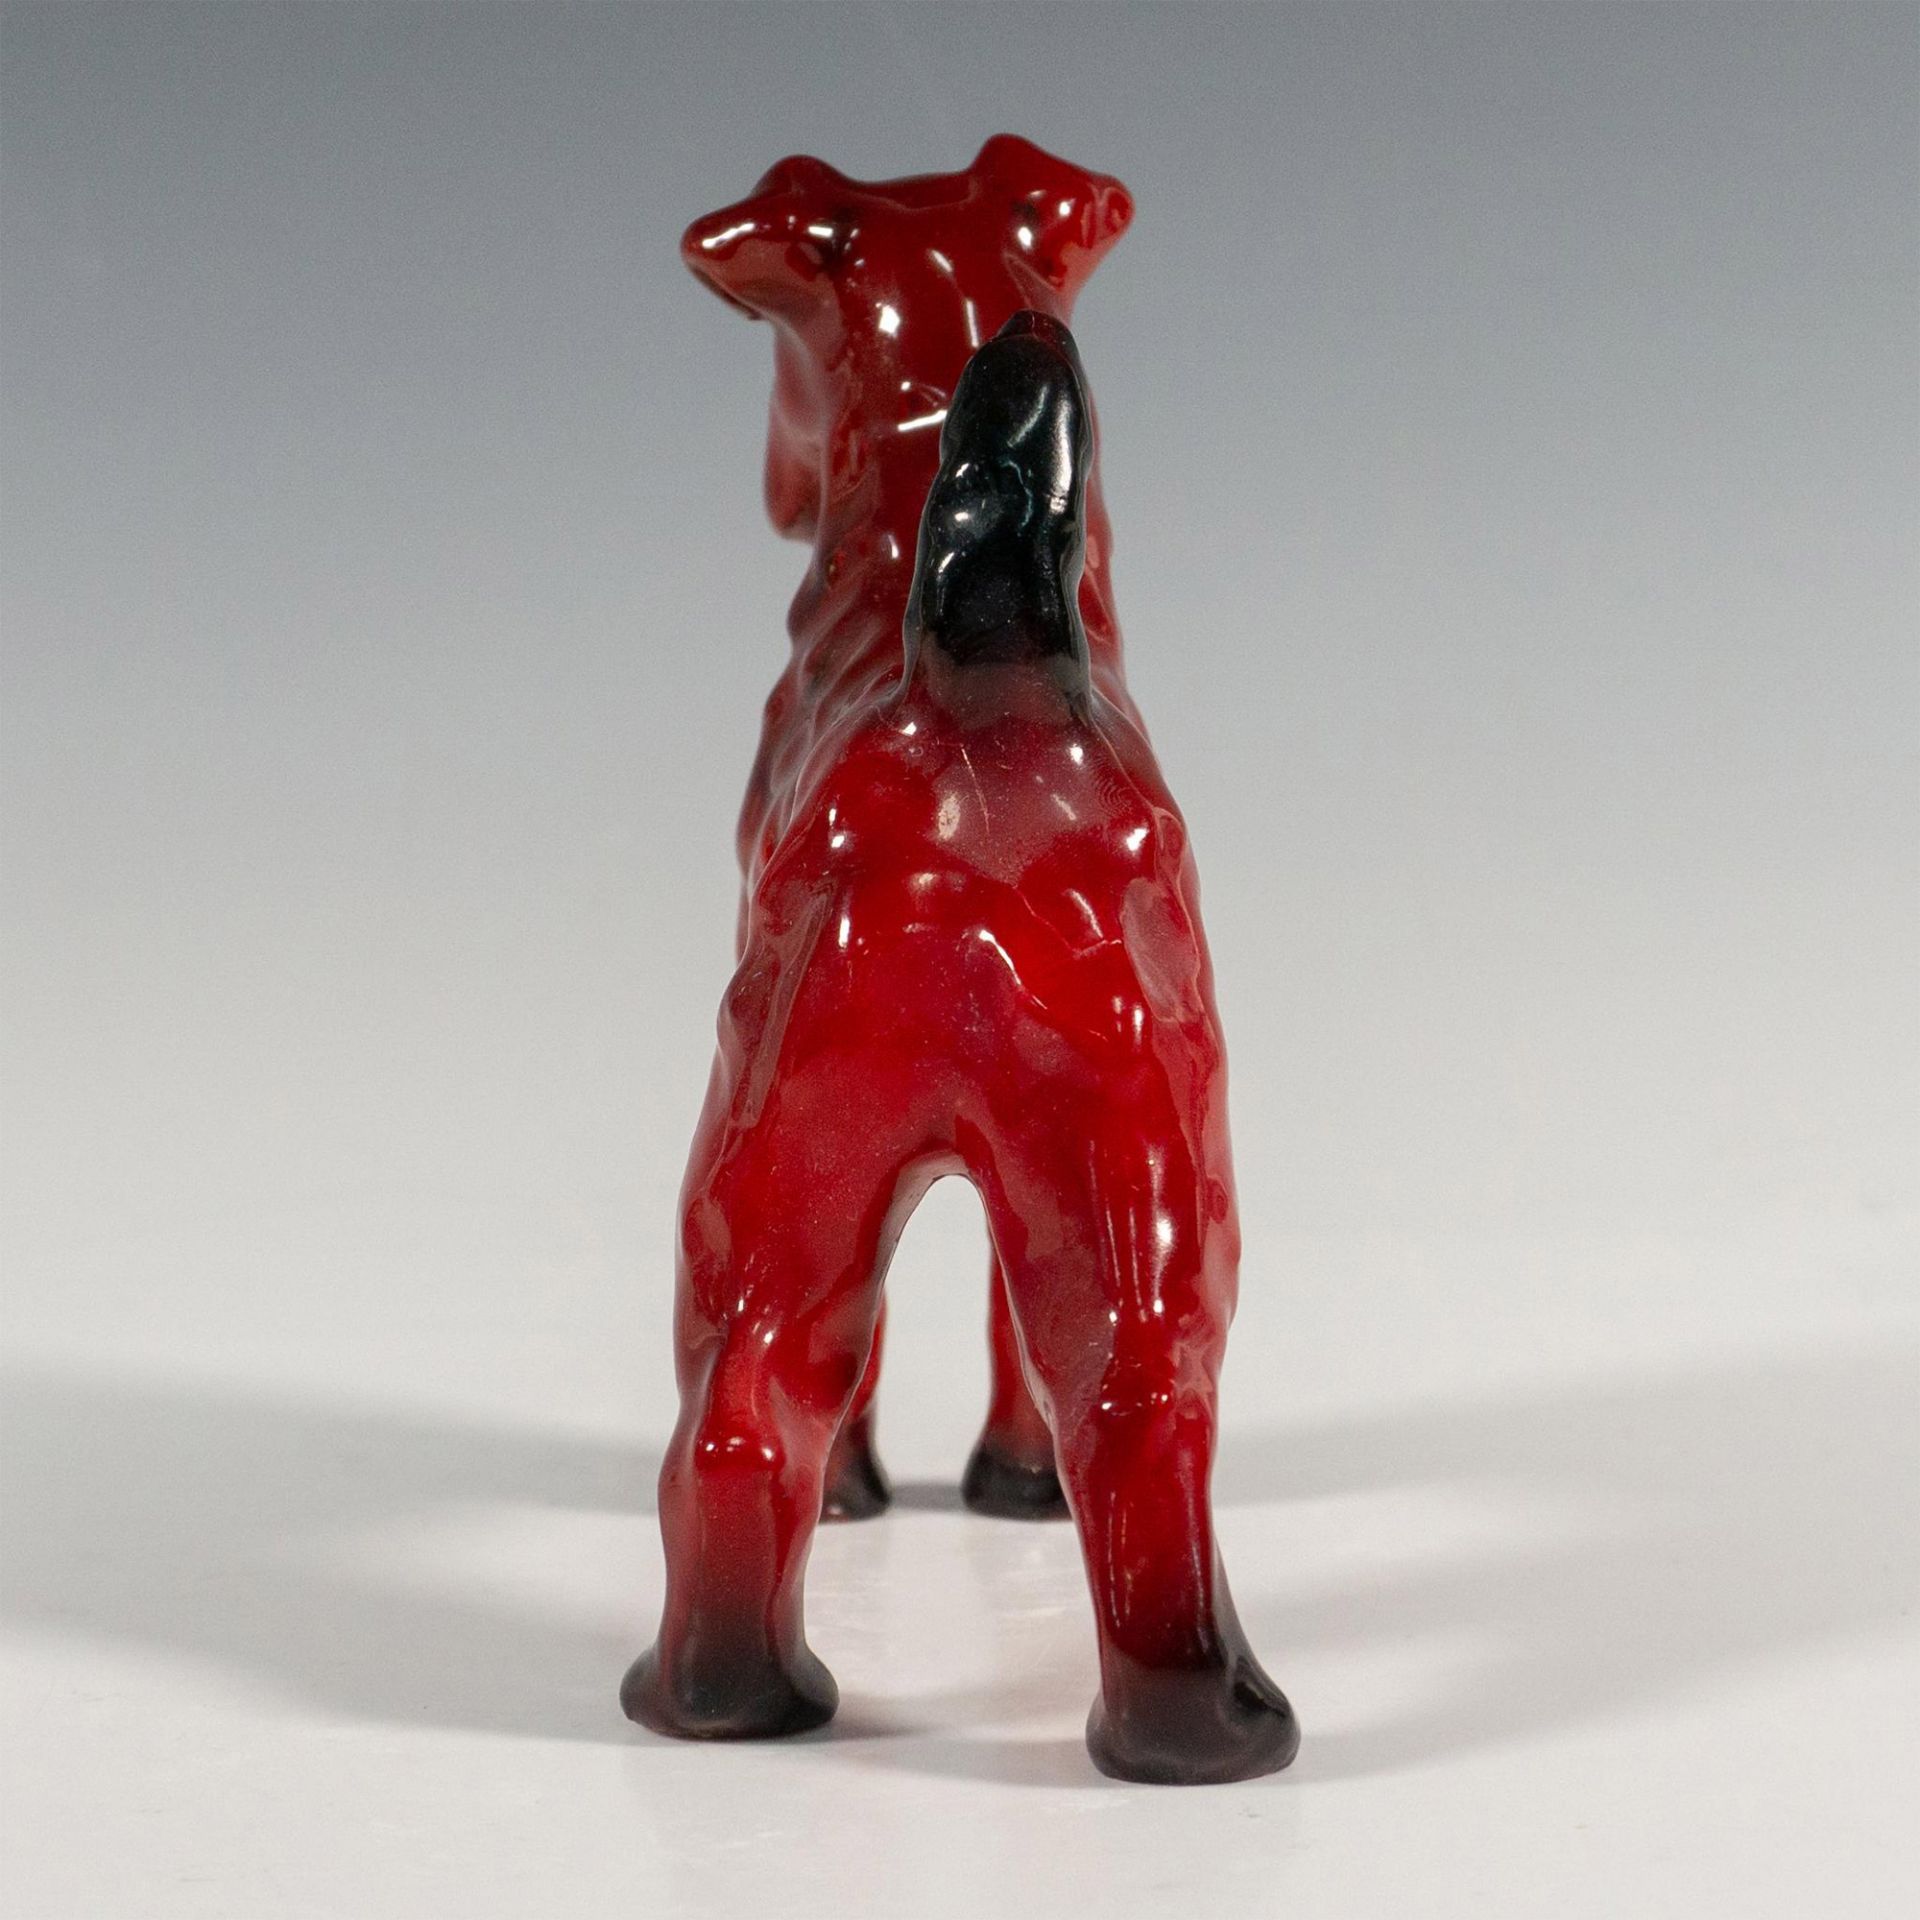 Royal Doulton Flambe Figurine, Airedale Terrier HN1023 - Image 4 of 5